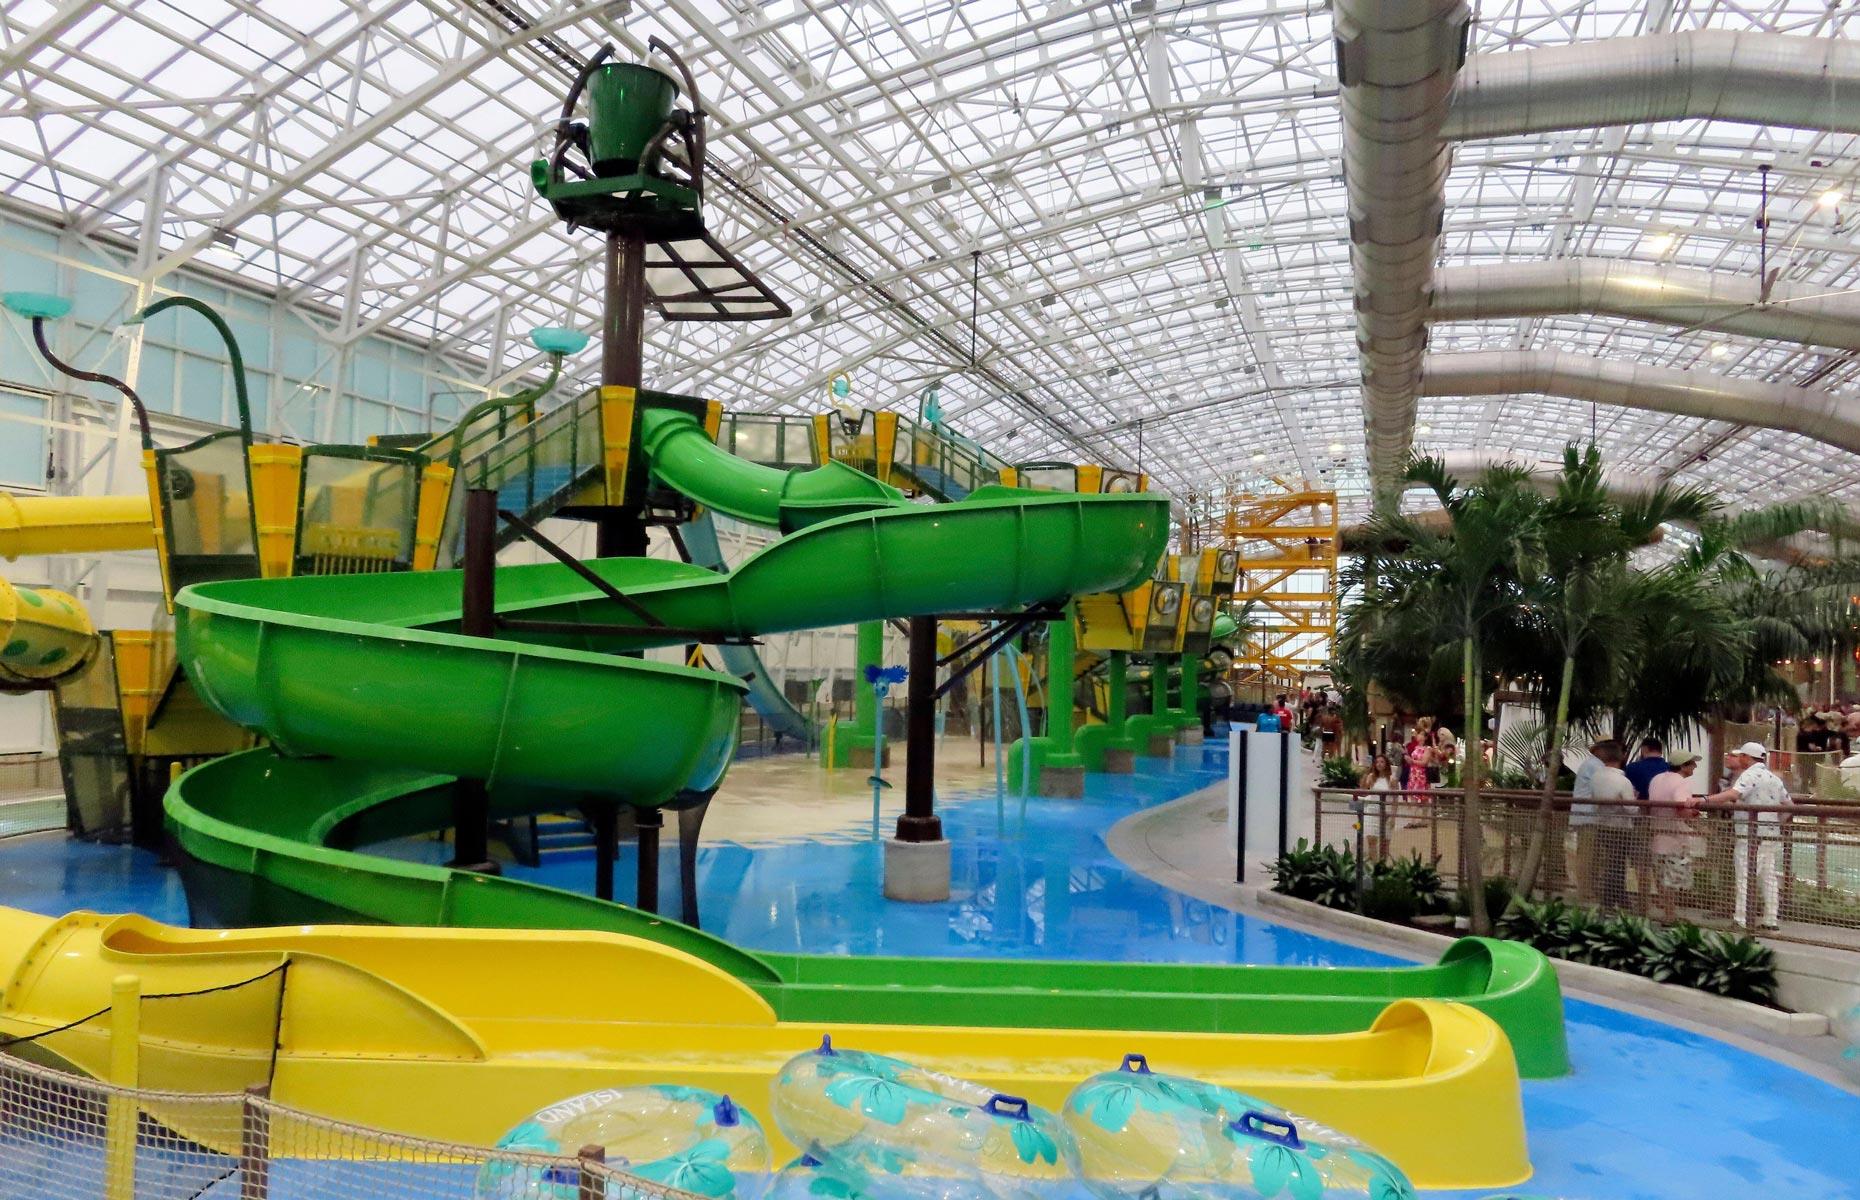 <p>Island Waterpark, which opened last year on the Atlantic City Boardwalk, is the world’s largest indoor beachfront waterpark and features 11 slides. Expect sharp turns on The Electric Eel, Sonic Serpent and Barracuda Blaster tube slides or head to Slide Island, which features five water slides suitable for younger guests. Spanning 120,000 square feet (111,48sqm), there's room for everyone and its indoor location means it's always warm and sunny.</p>